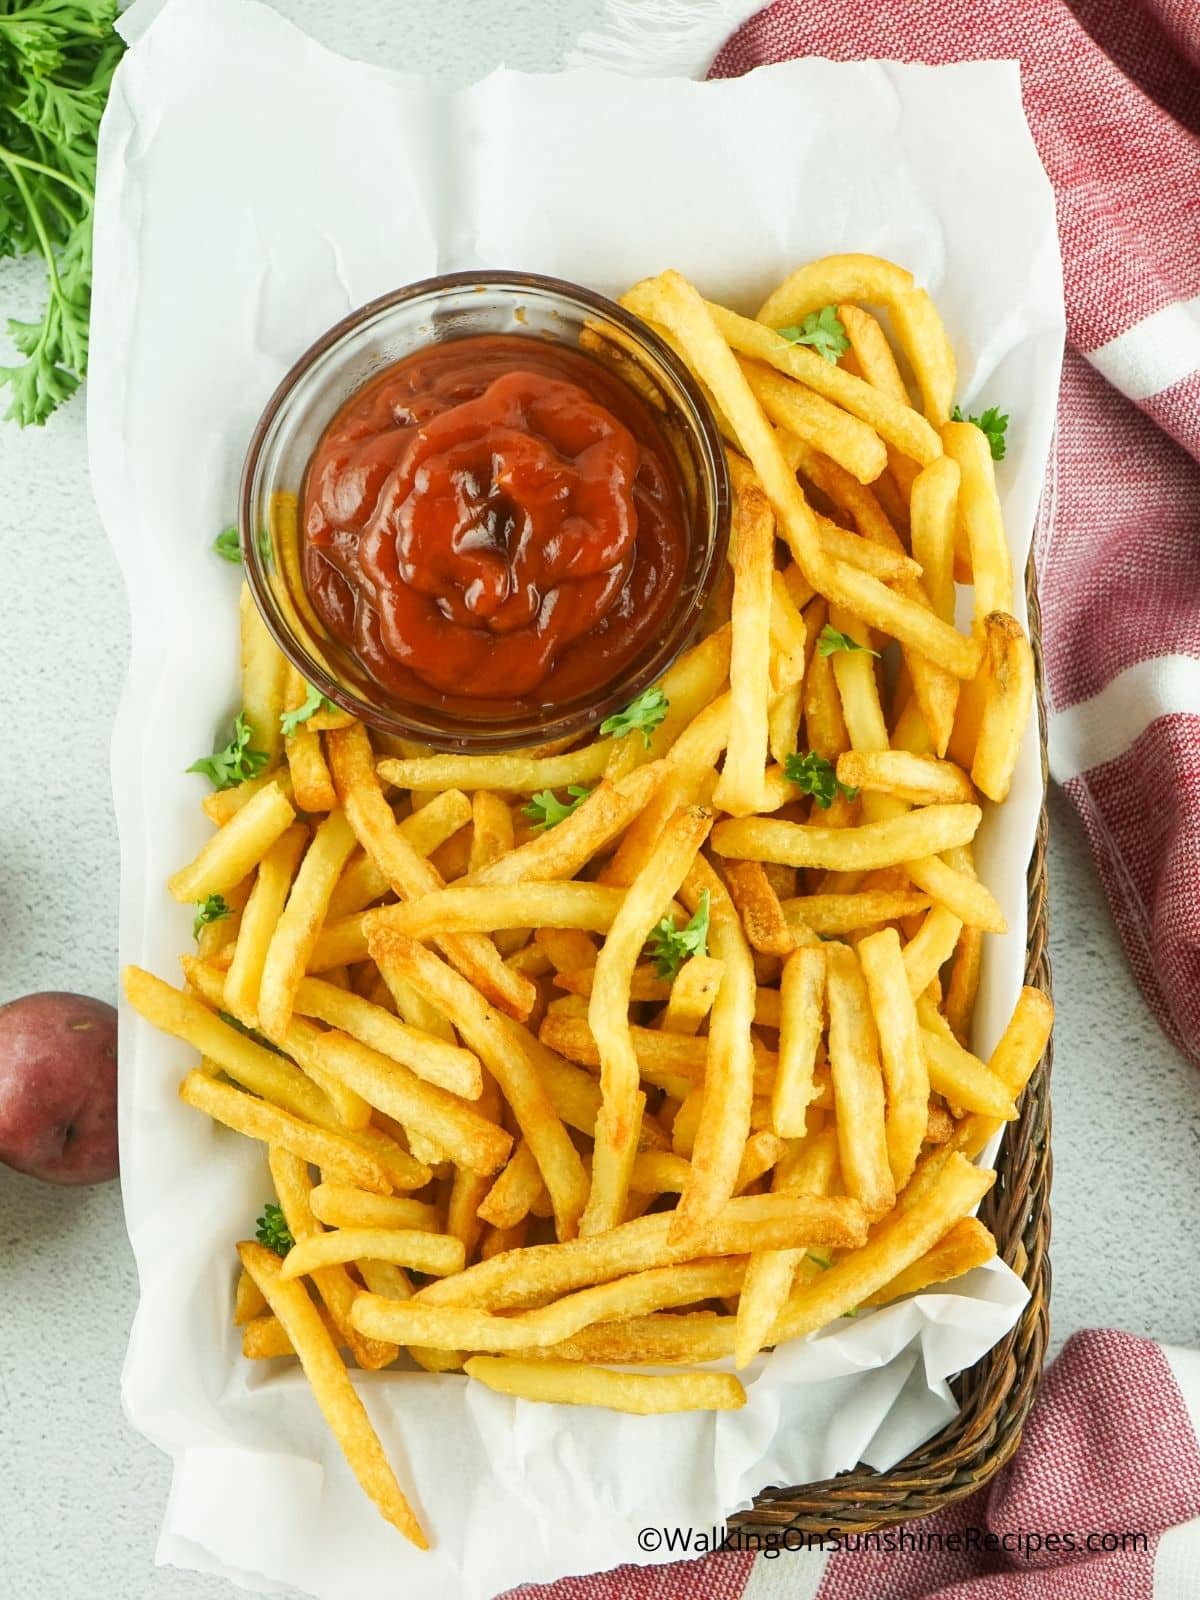 French fries with ketchup made extra crispy using an air fryer.